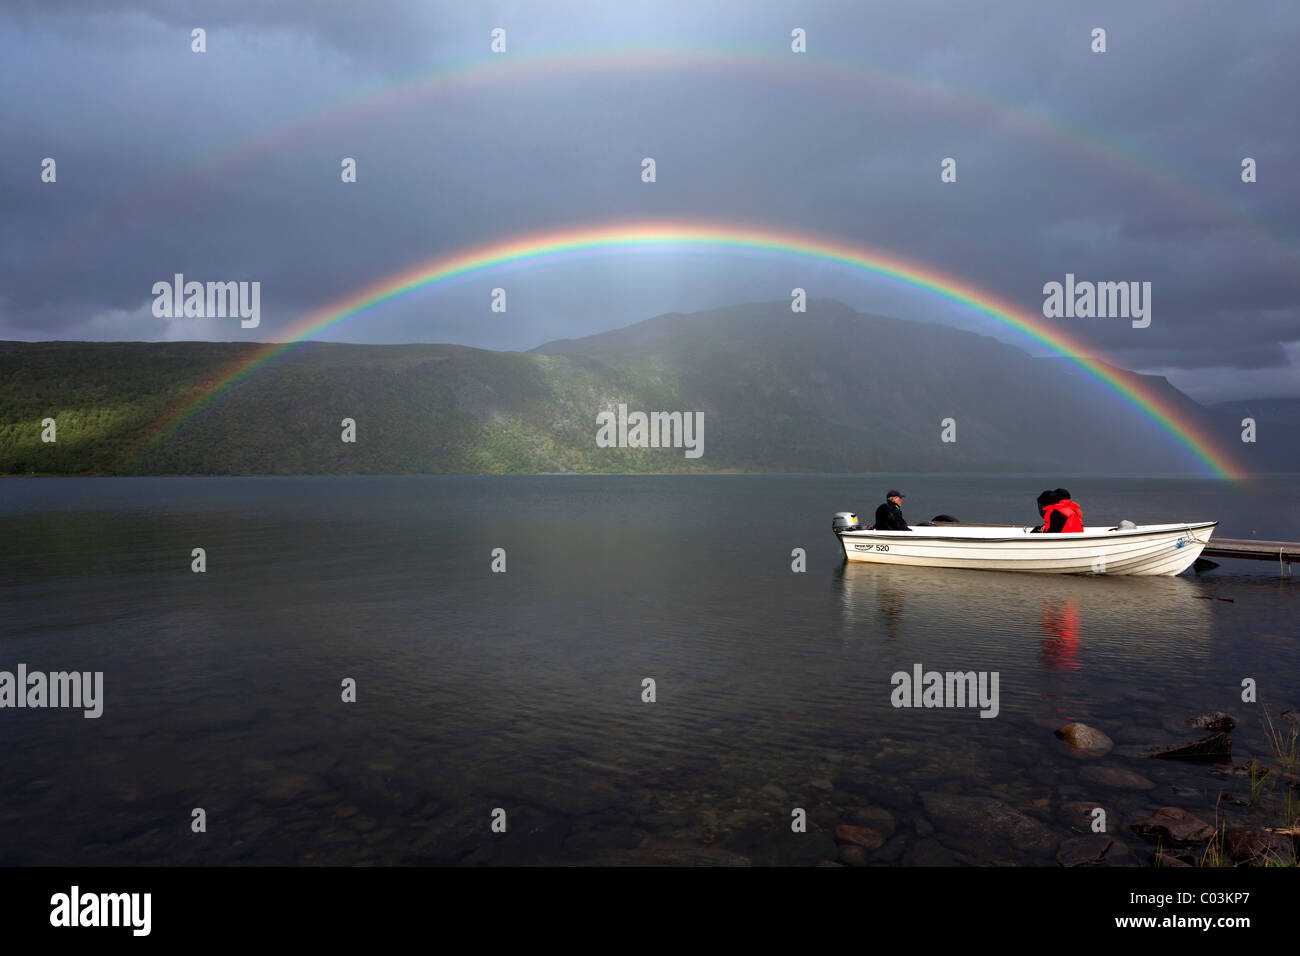 Rainbow and boat on Lake Teusajaure, Kungsleden, The King's Trail, Lapland, Sweden, Europe Stock Photo